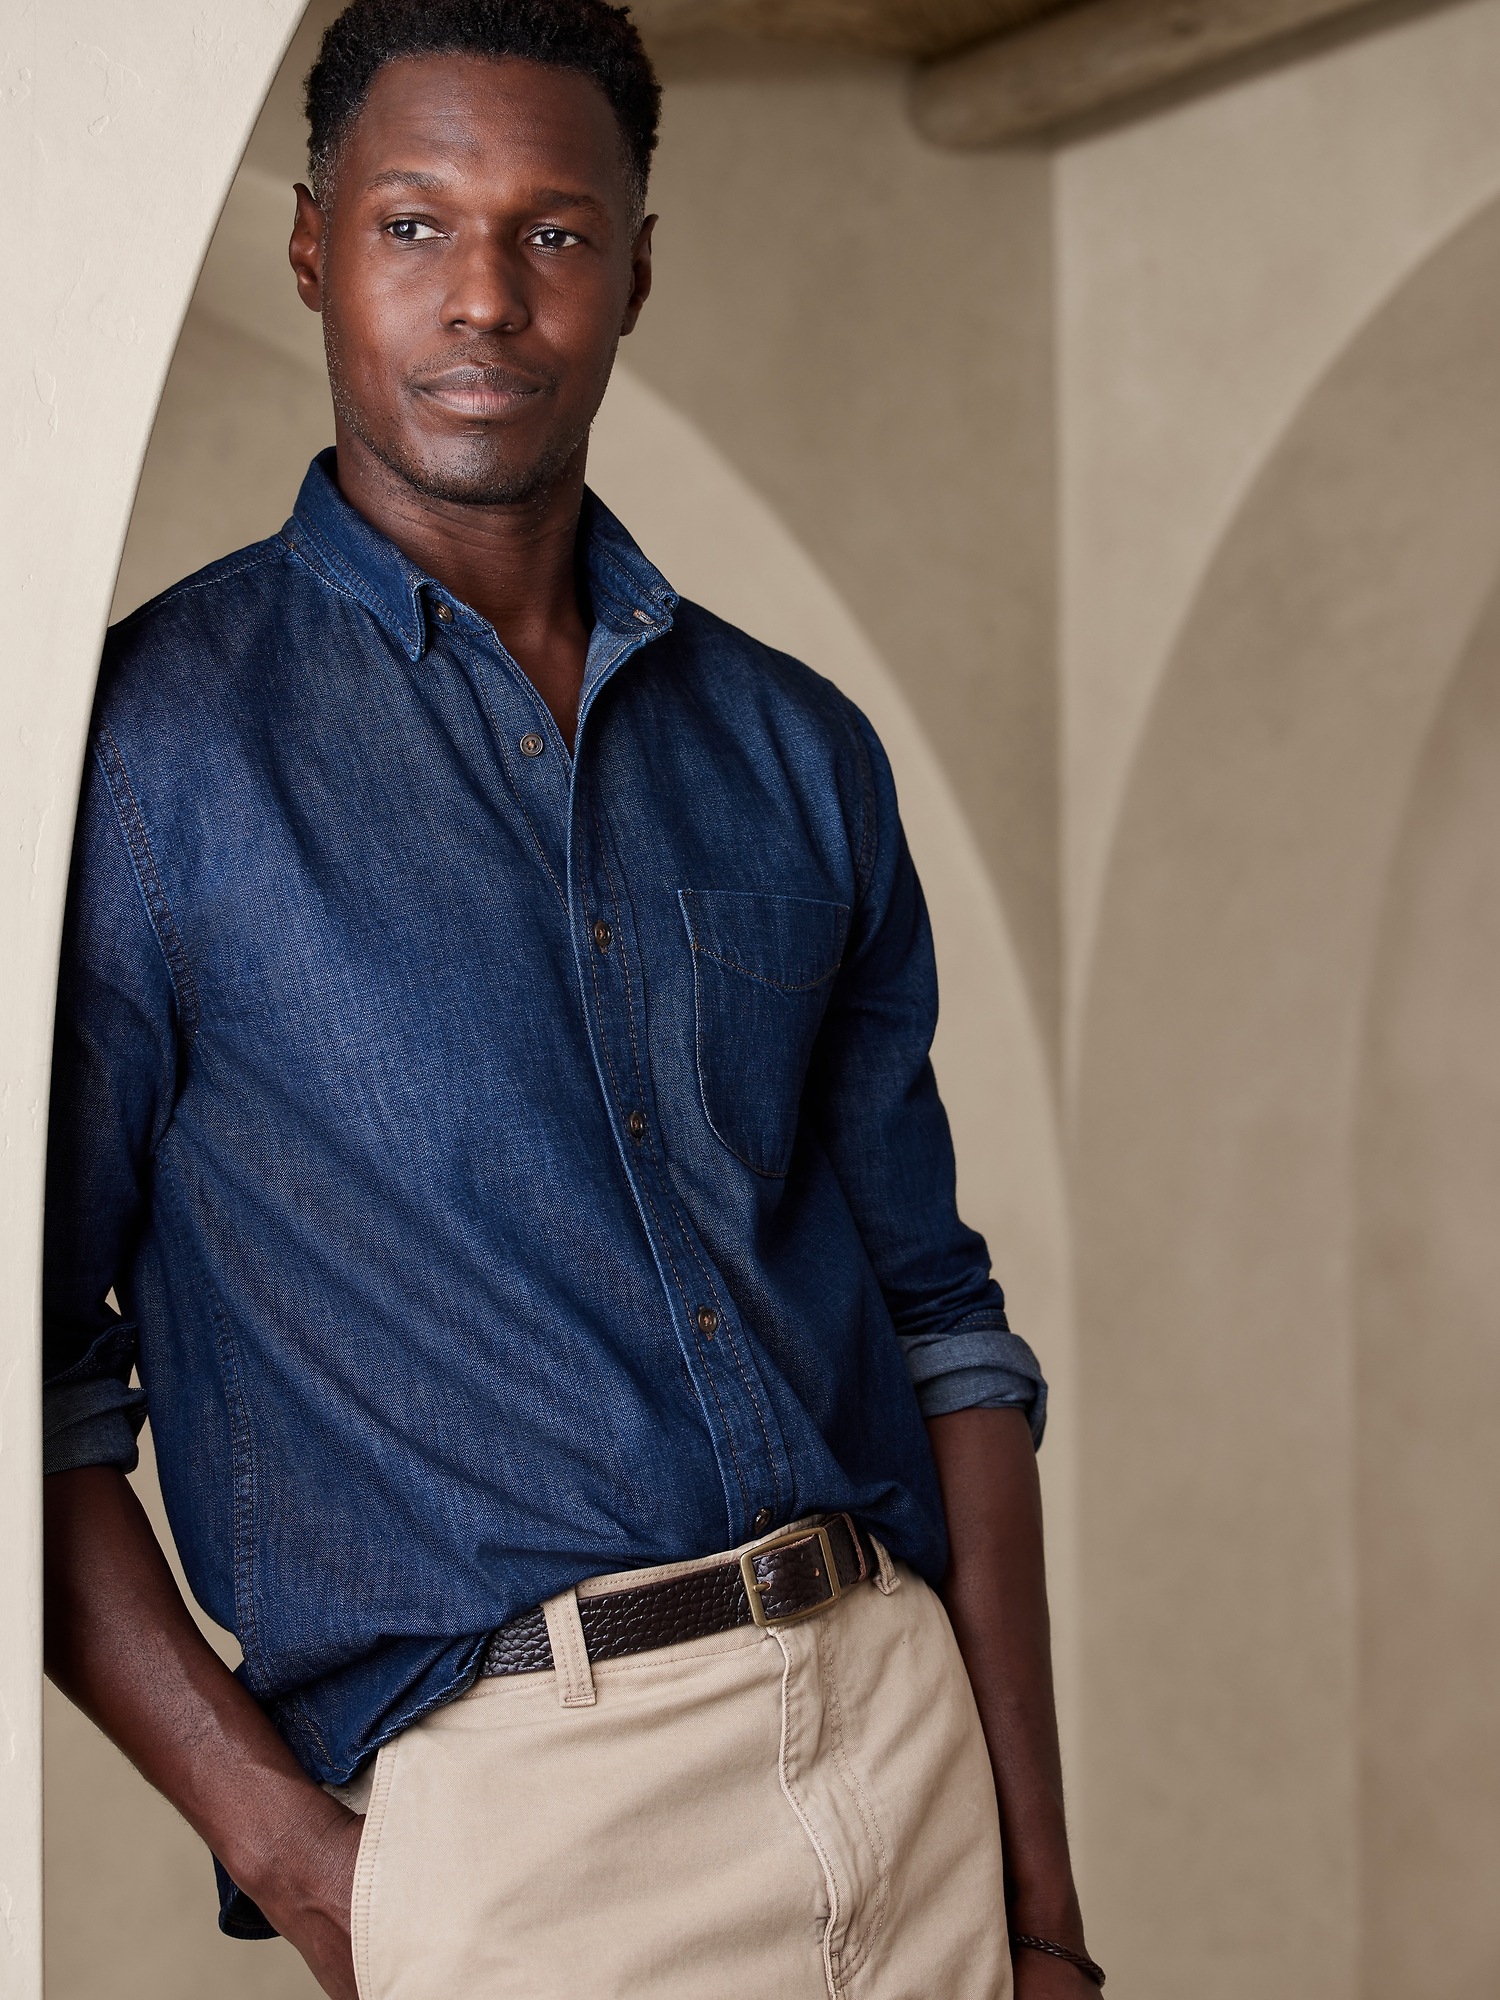 Banana Republic Factory - Meet our new blues, starting with the Indigo Shirt  in 100% cotton. https://bit.ly/3Qqp5VN | Facebook